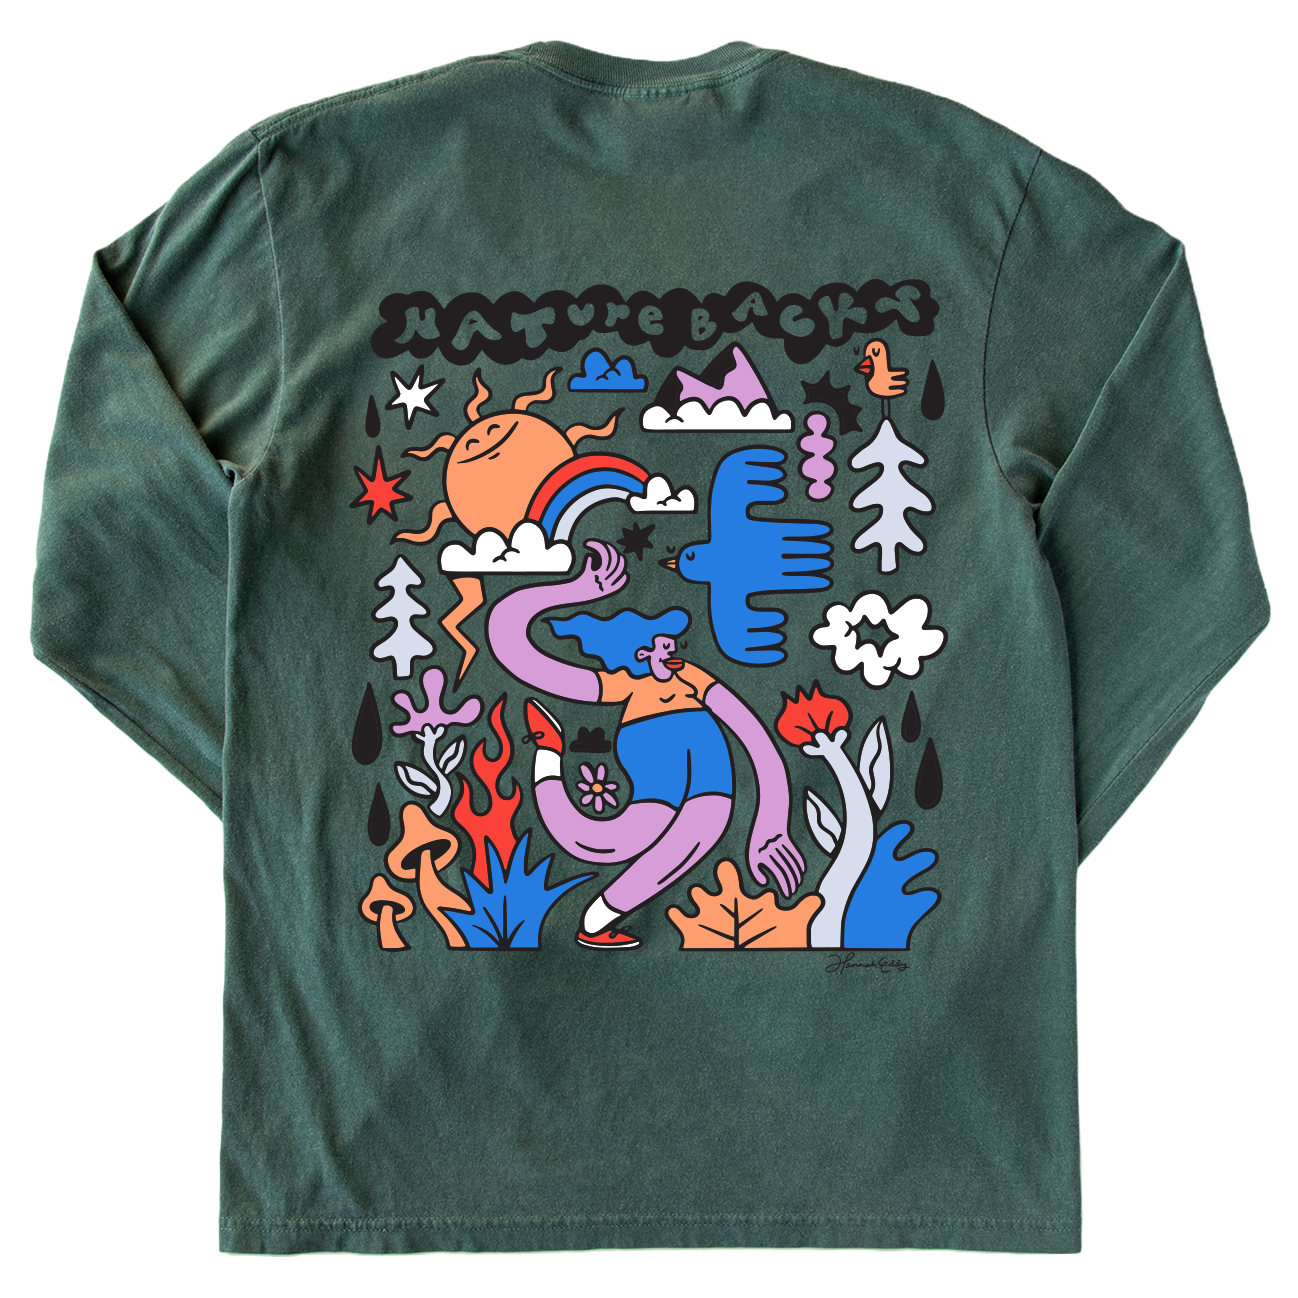 Nature Backs Limited Edition Long Sleeve 100% Organic Cotton T-Shirt | Limited Dreamer Spruce Long Sleeve made with Eco-Friendly Fibers Sustainably made in the USA 